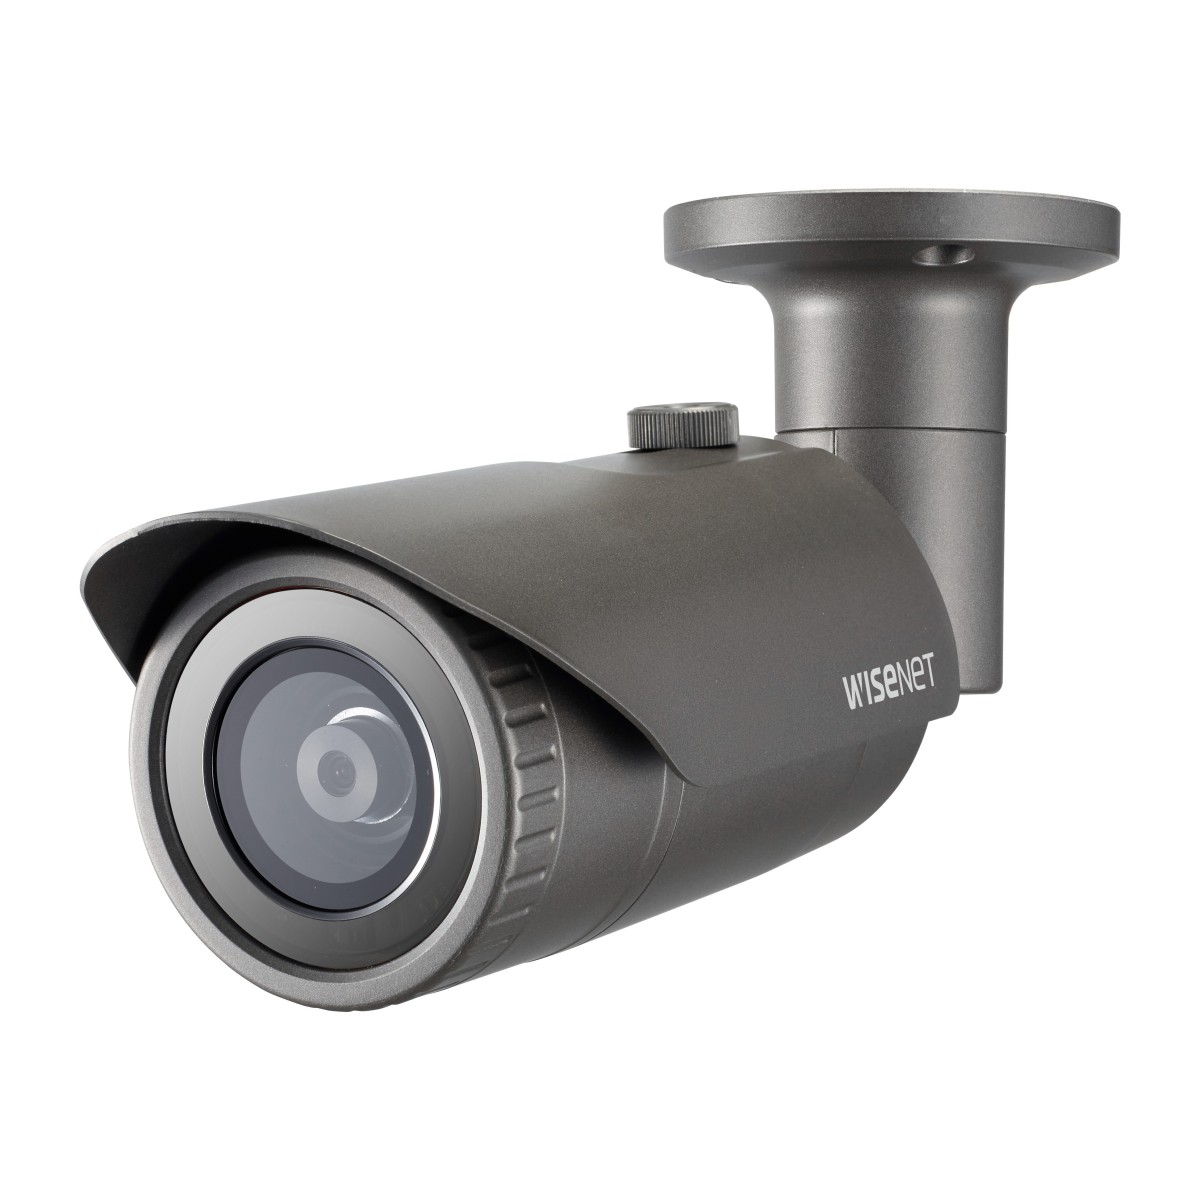 Hanwha Techwin Hanwha QNO-8010R - IP security camera - Outdoor - Wired - Bullet - Ceiling/Wall - Gray